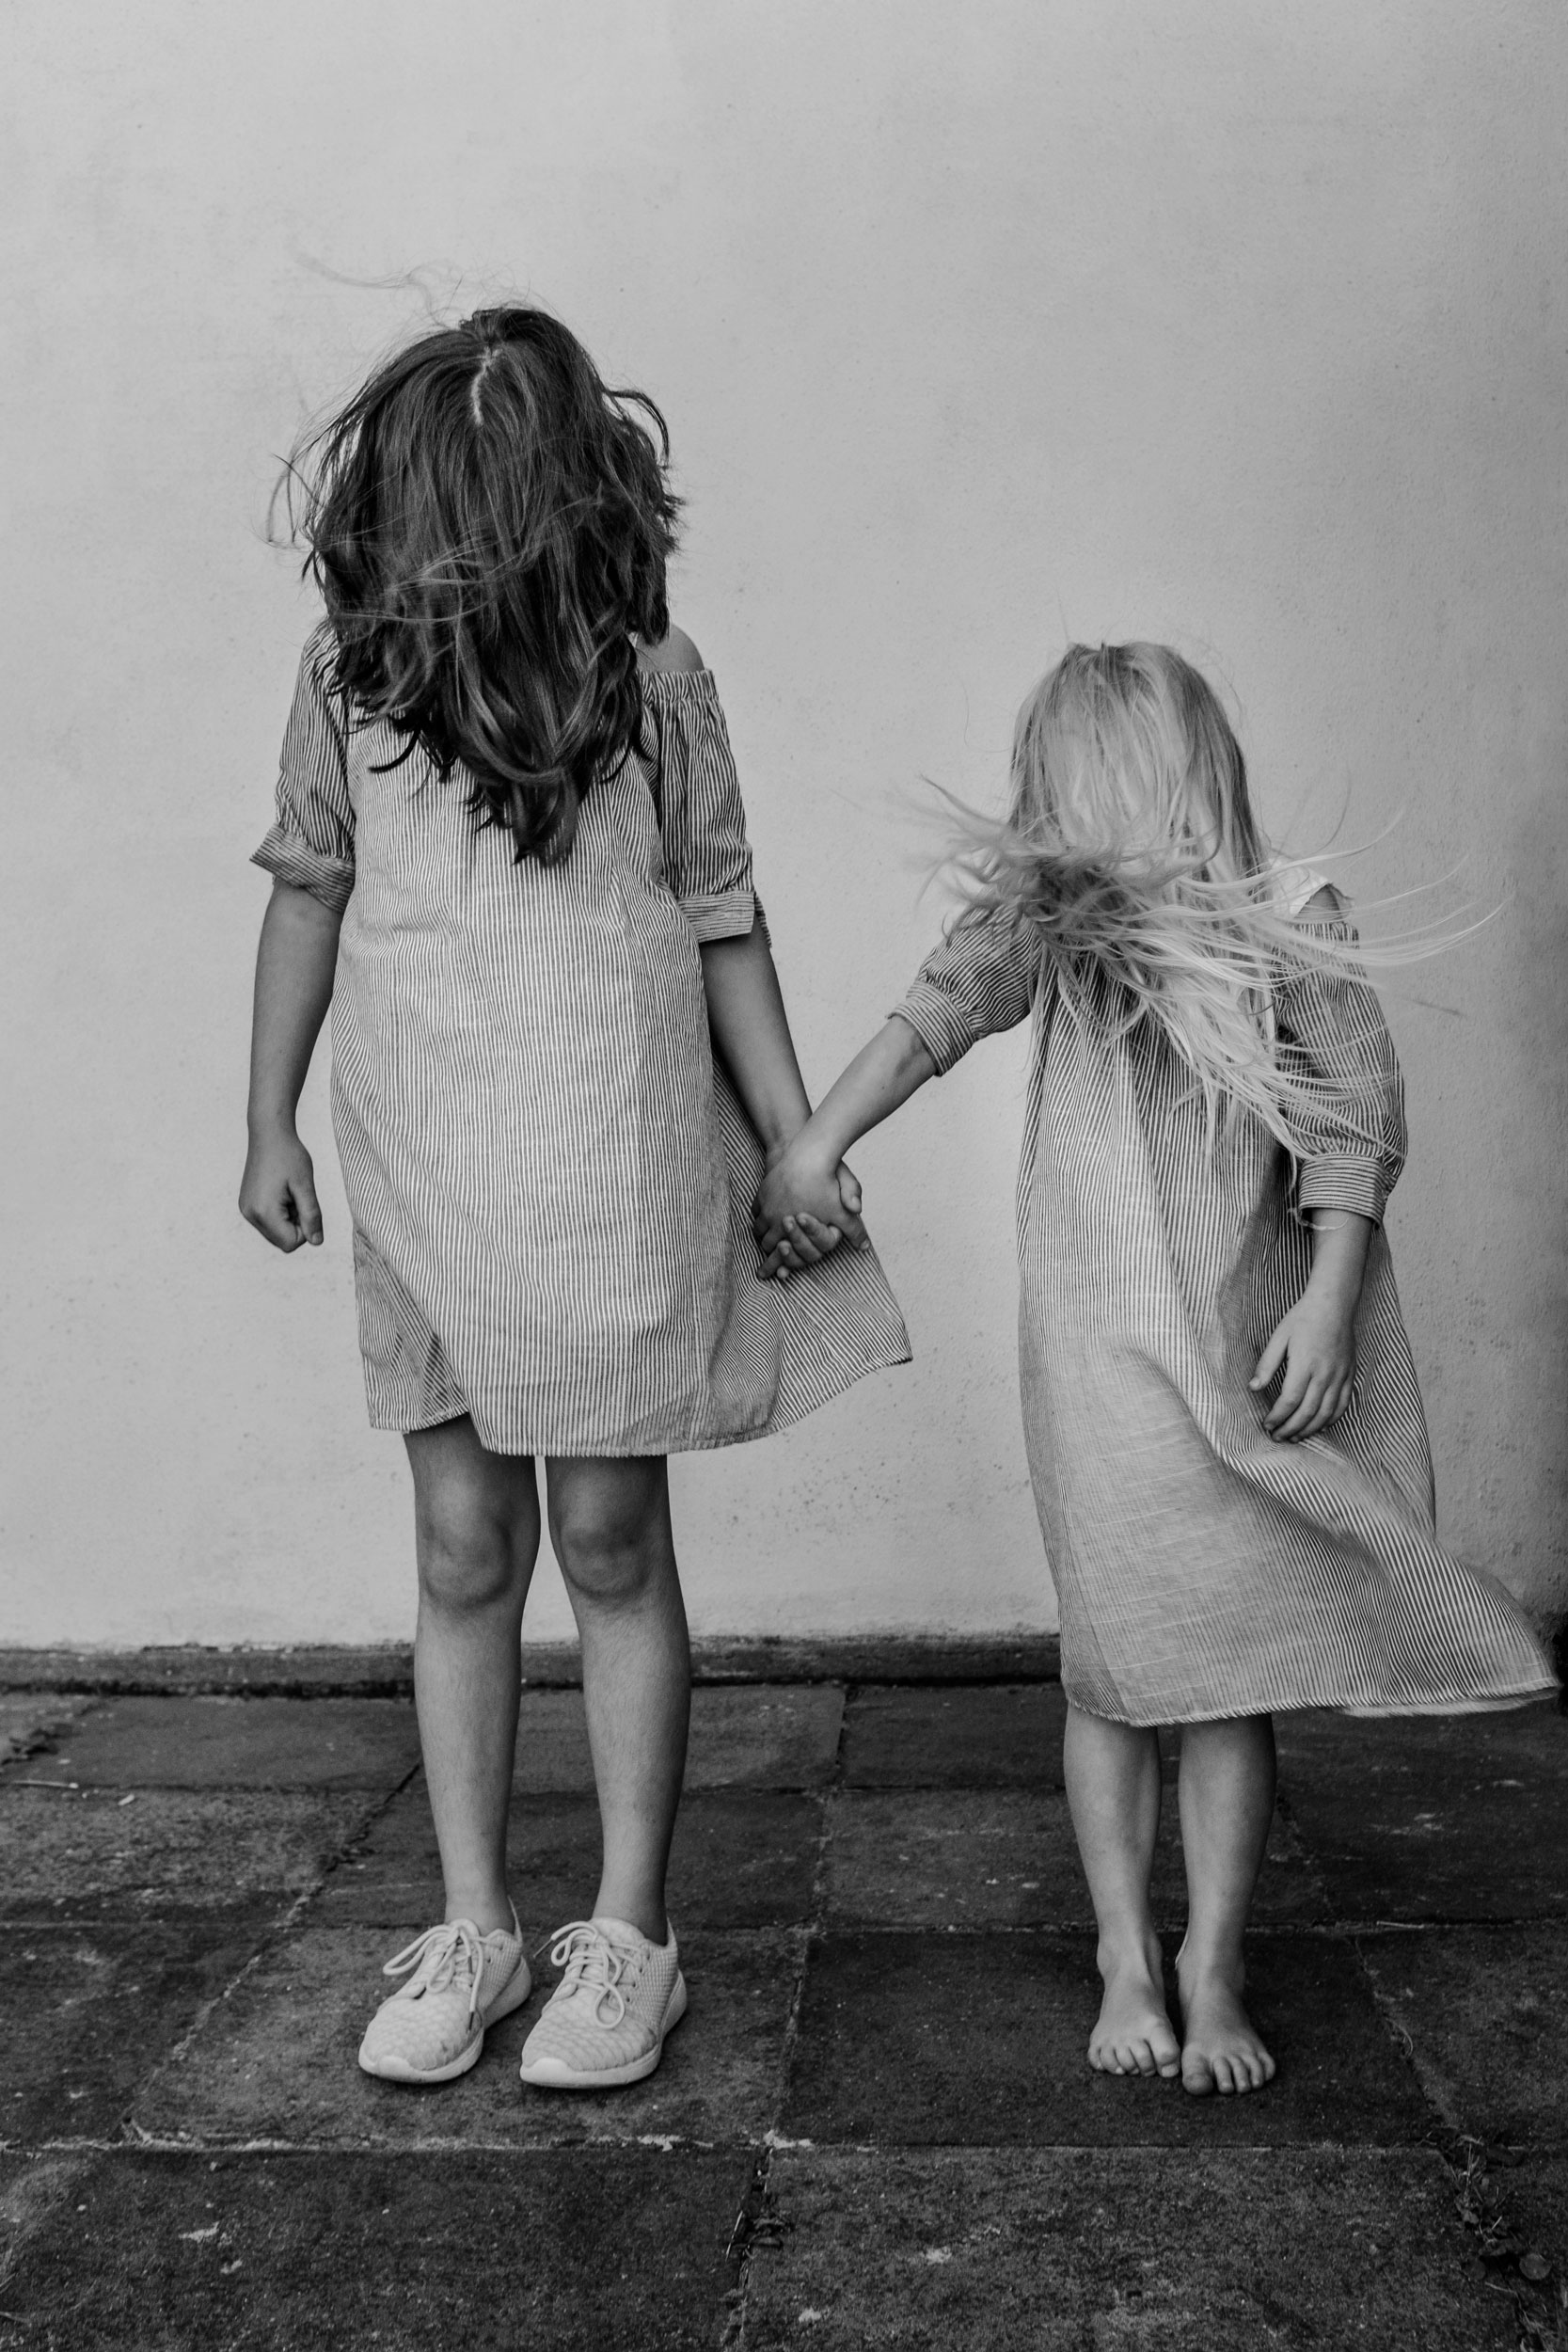 Sisters By Heart. Photo by photographer Martin Thaulow. Open Edition (seen without the white frame around the image). Buy high quality print.